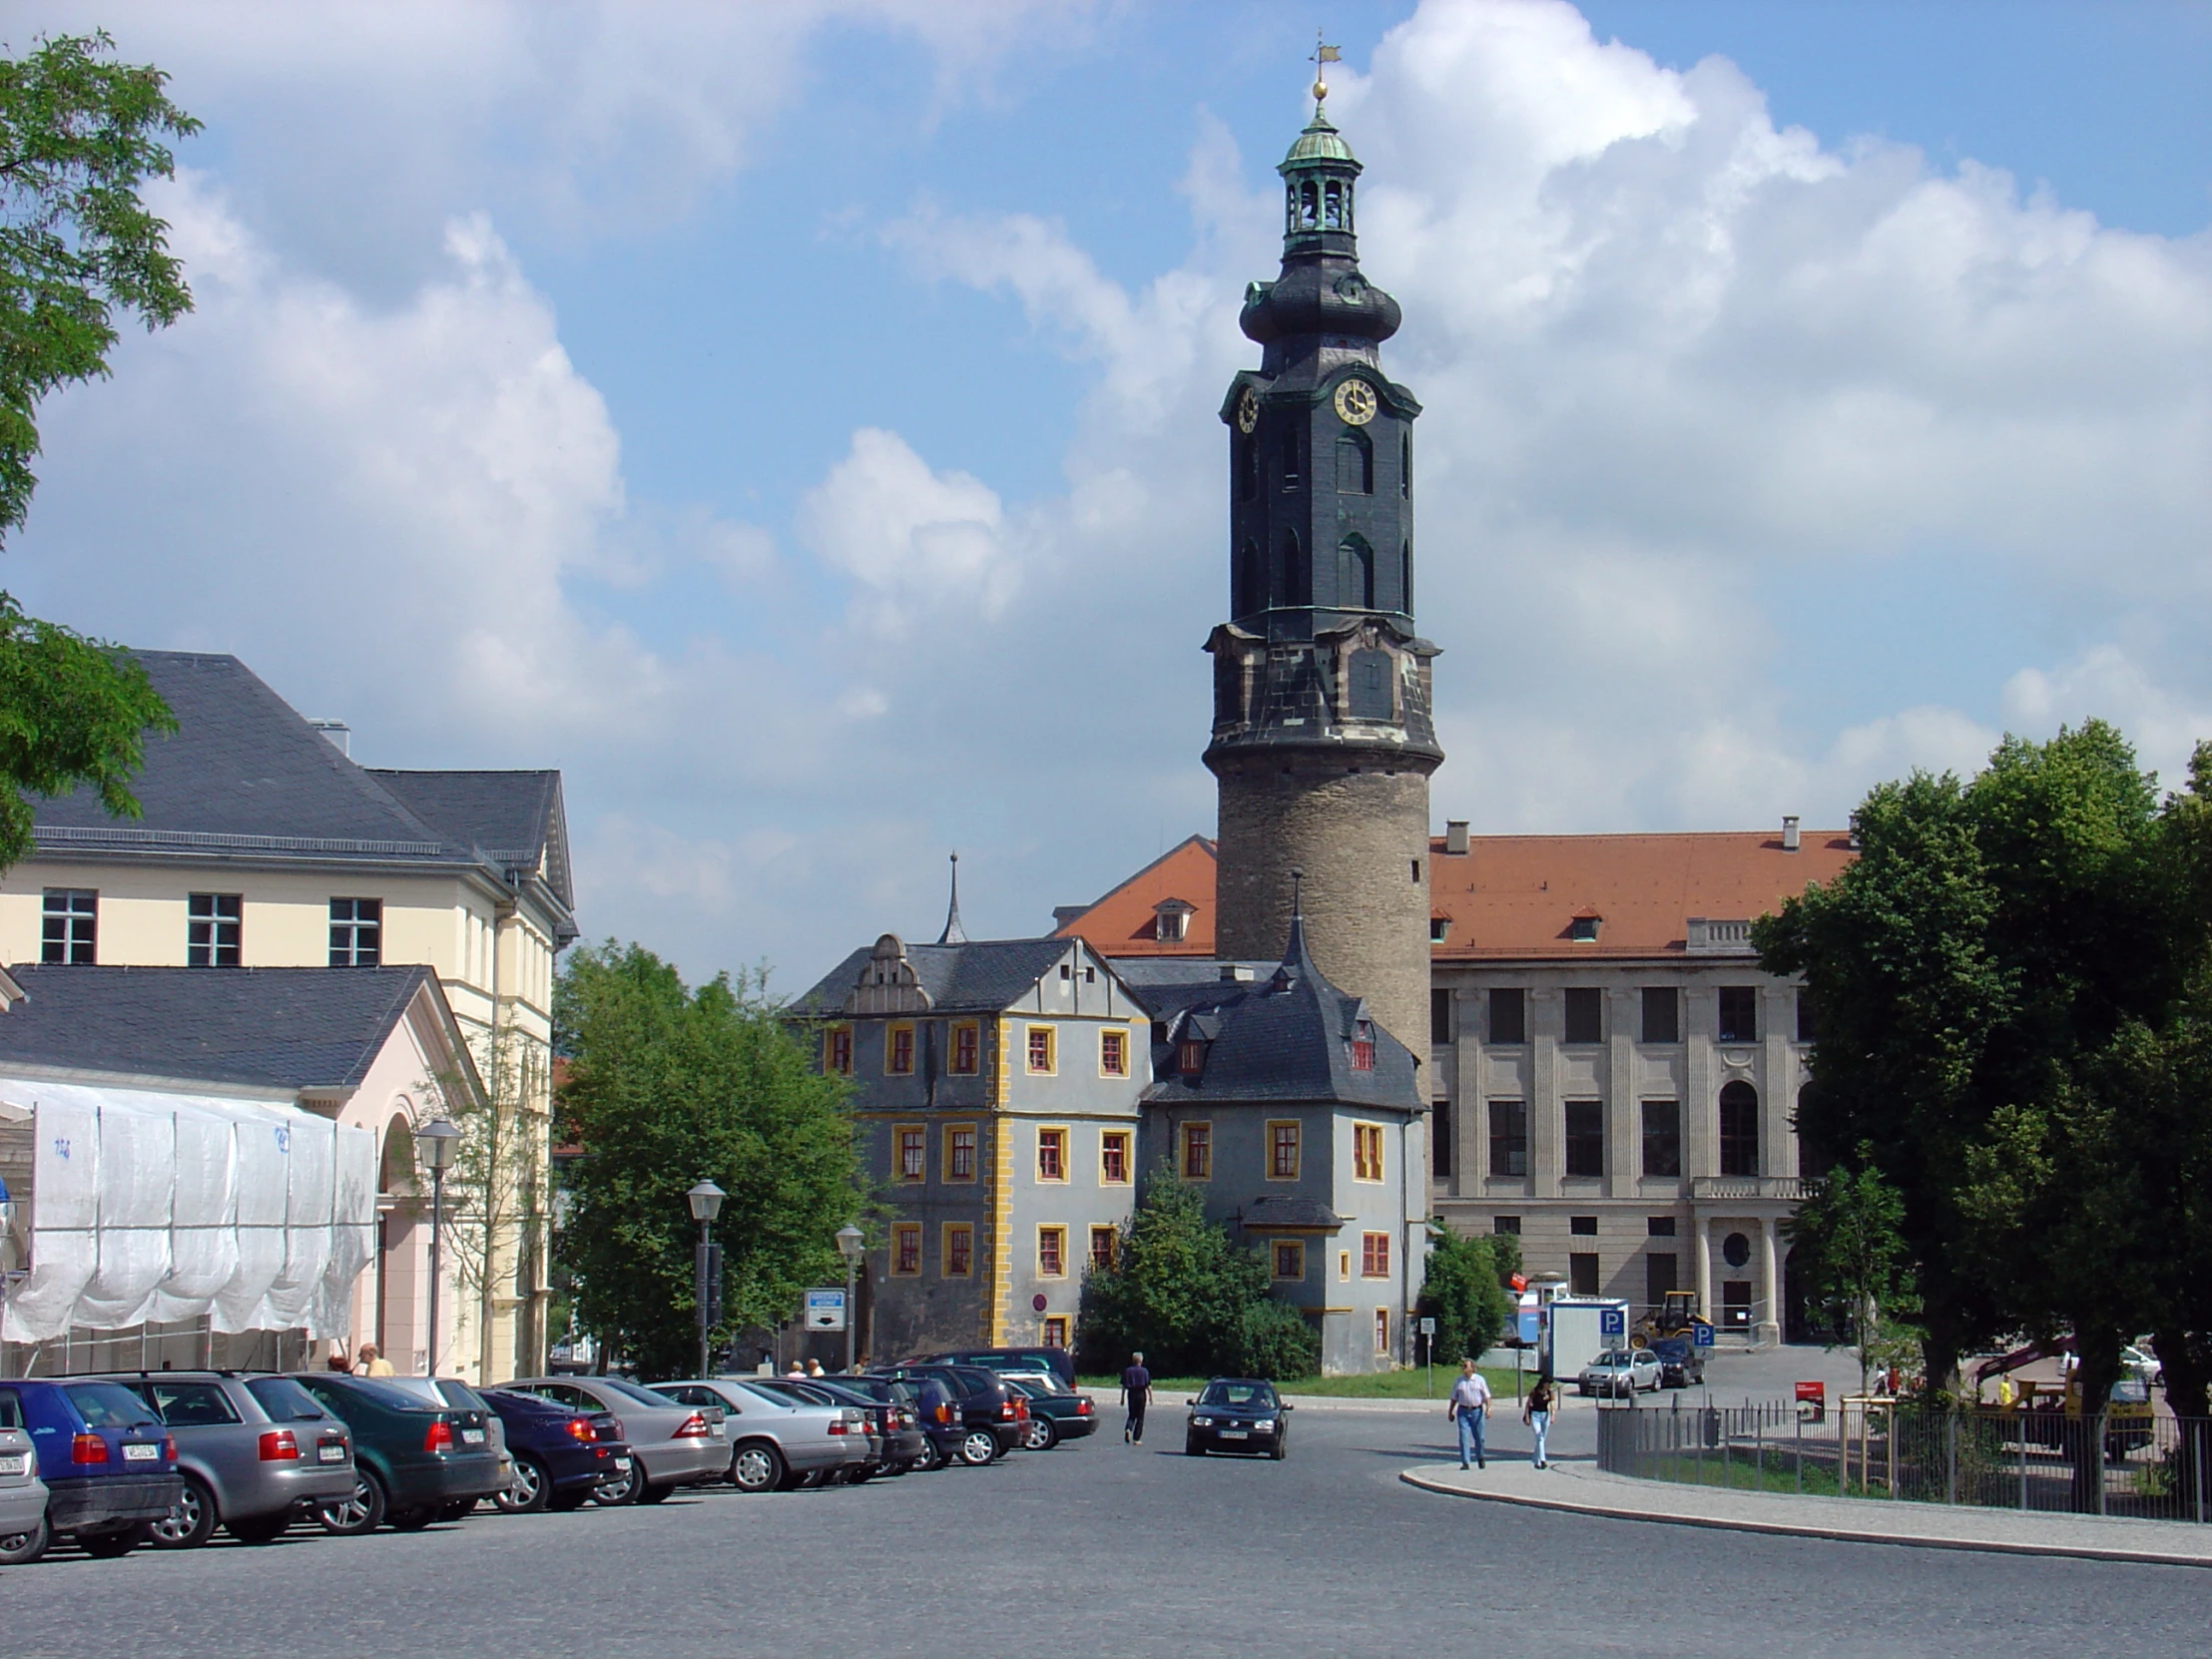 an old church and a street in the center of a town